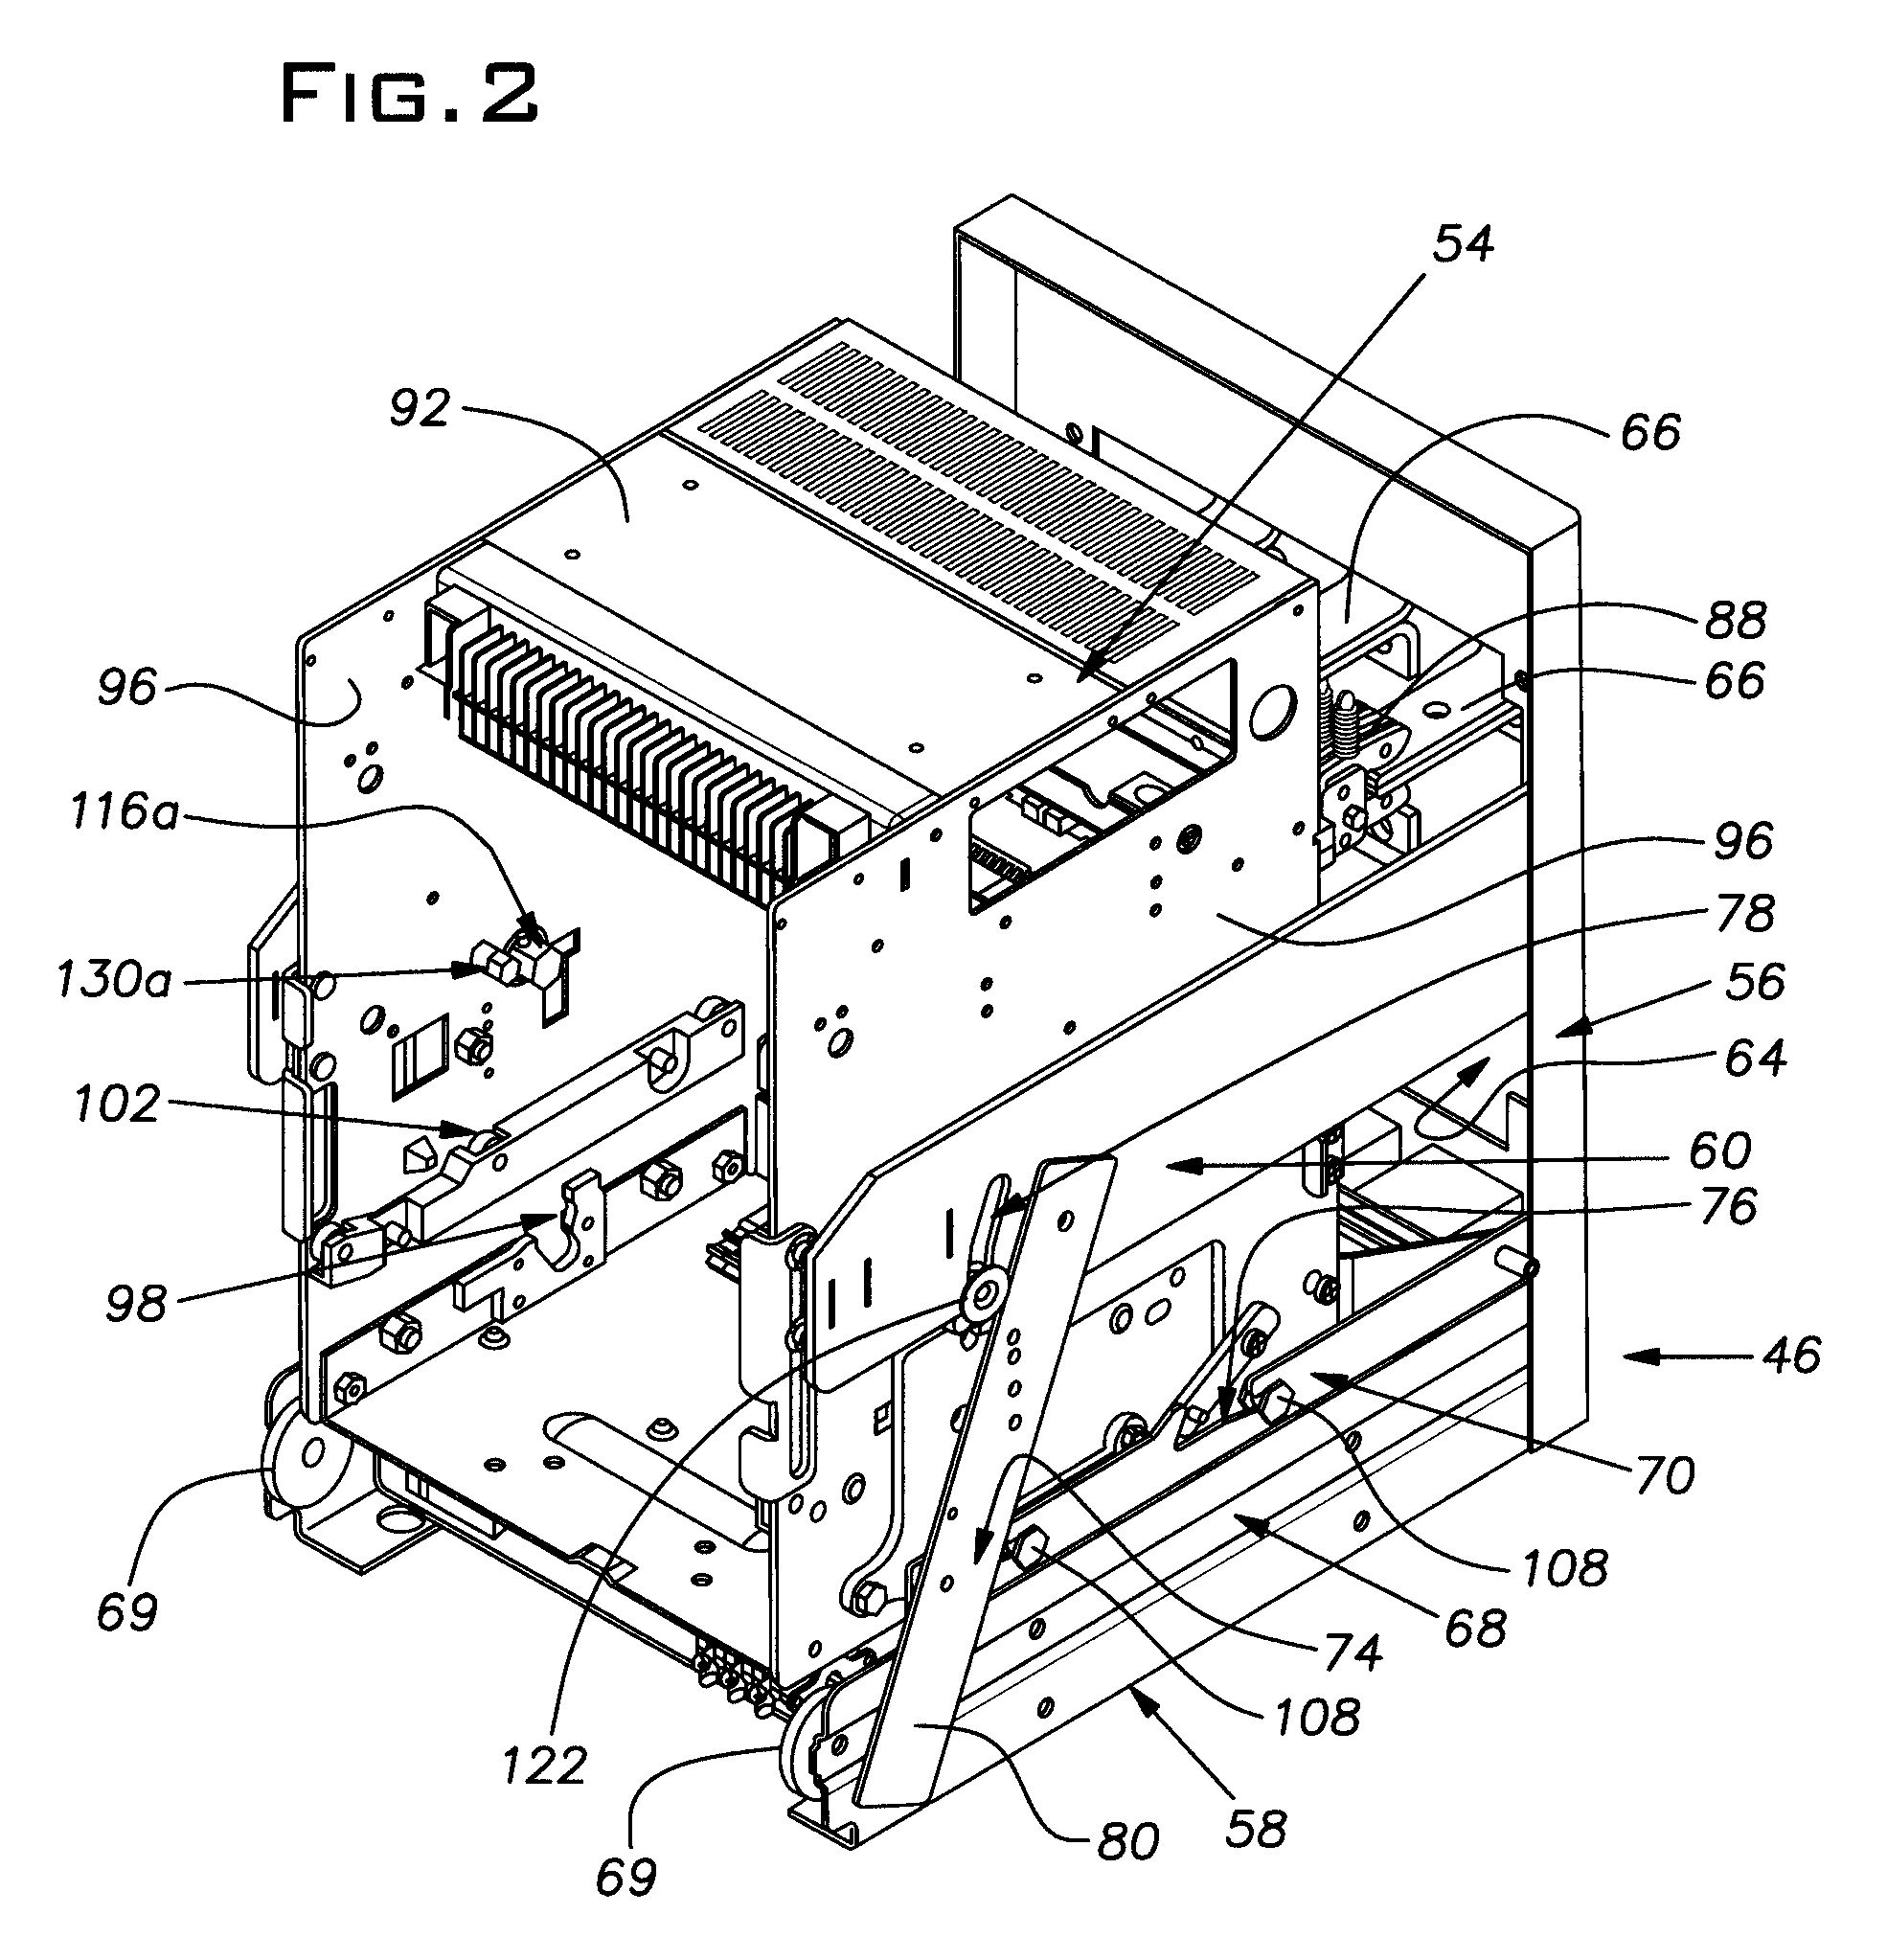 Circuit breaker cradle with an interlock system and a method of using the same